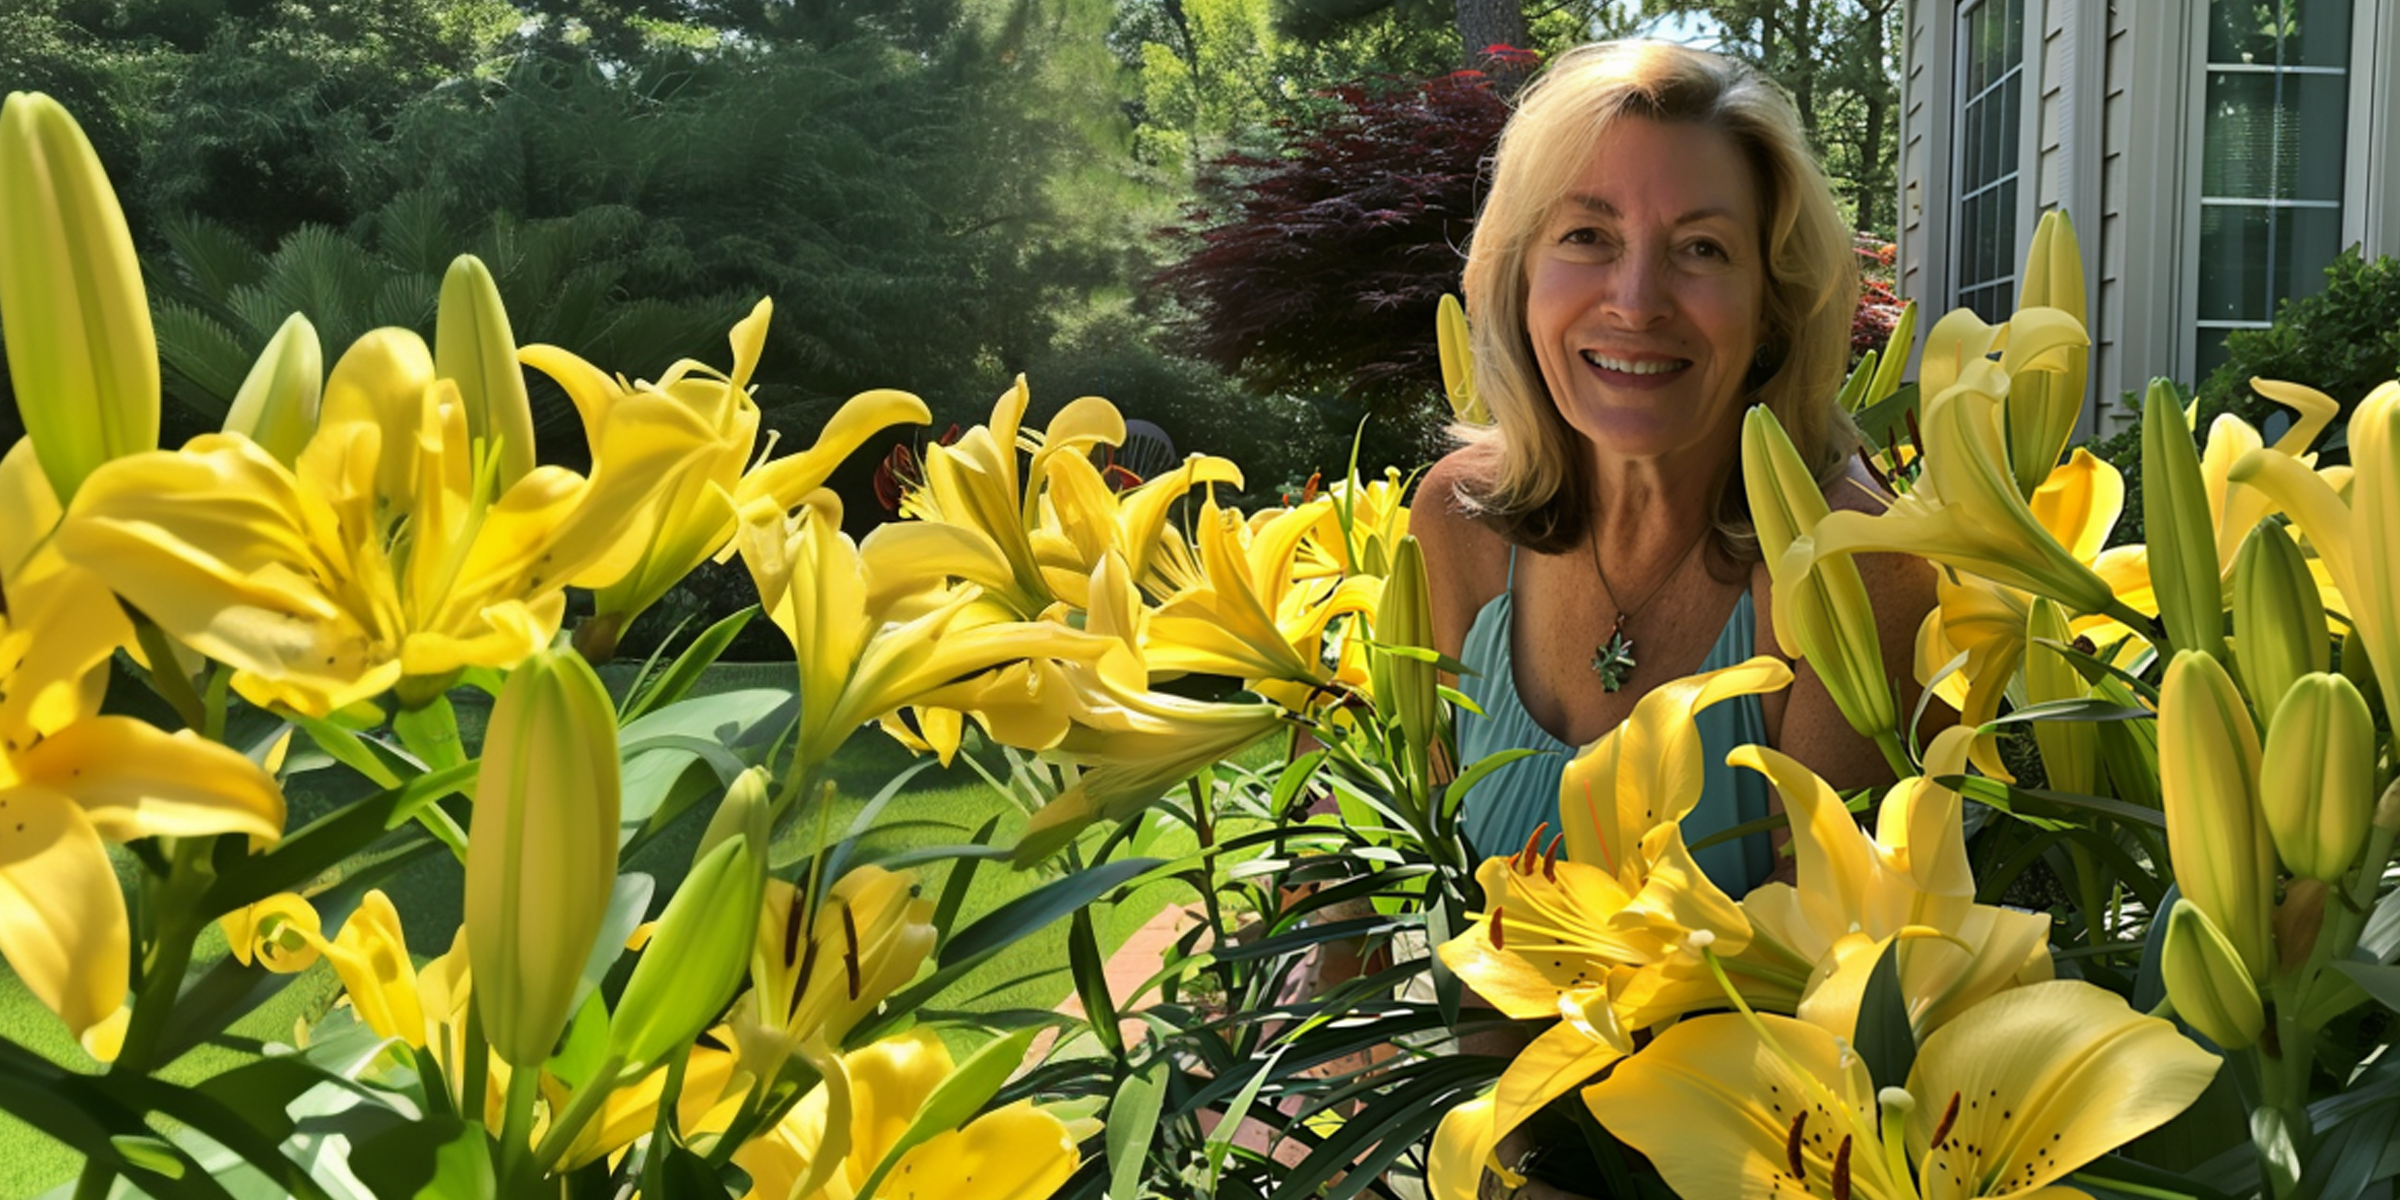 A woman posing behind a bright array of lilies | Source: Amomama